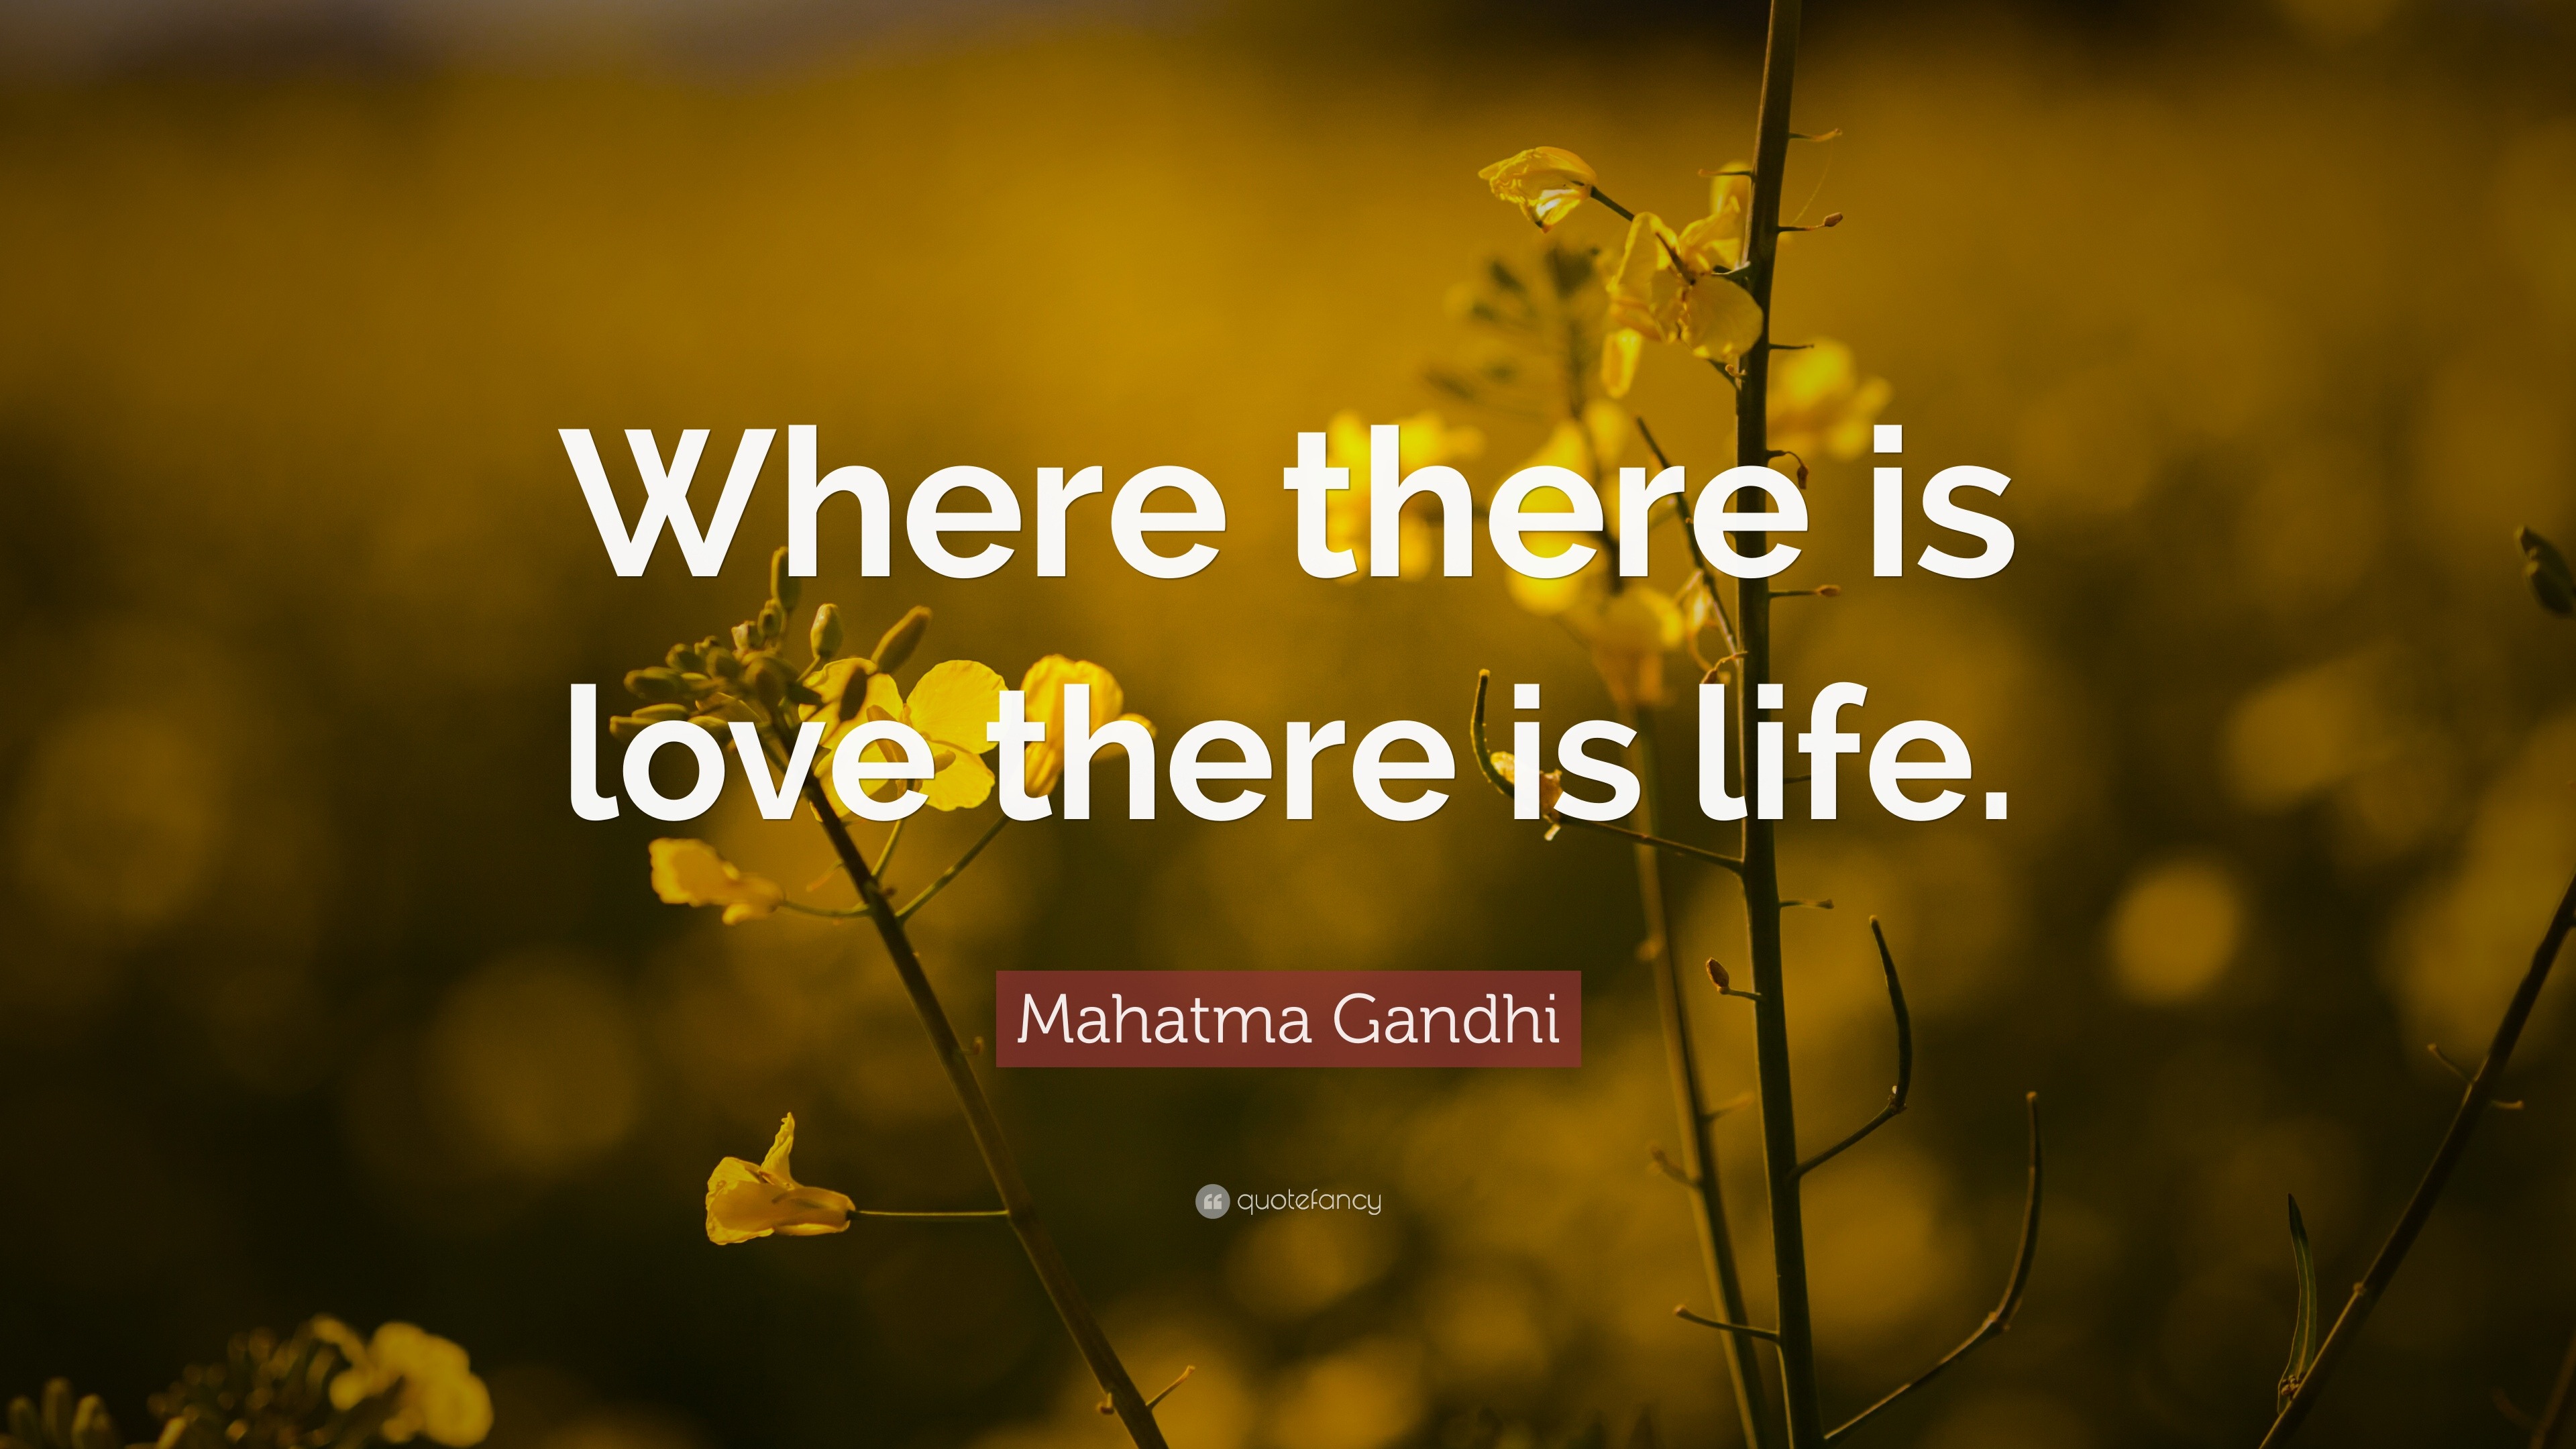 Mahatma Gandhi Quote “Where there is love there is life ”